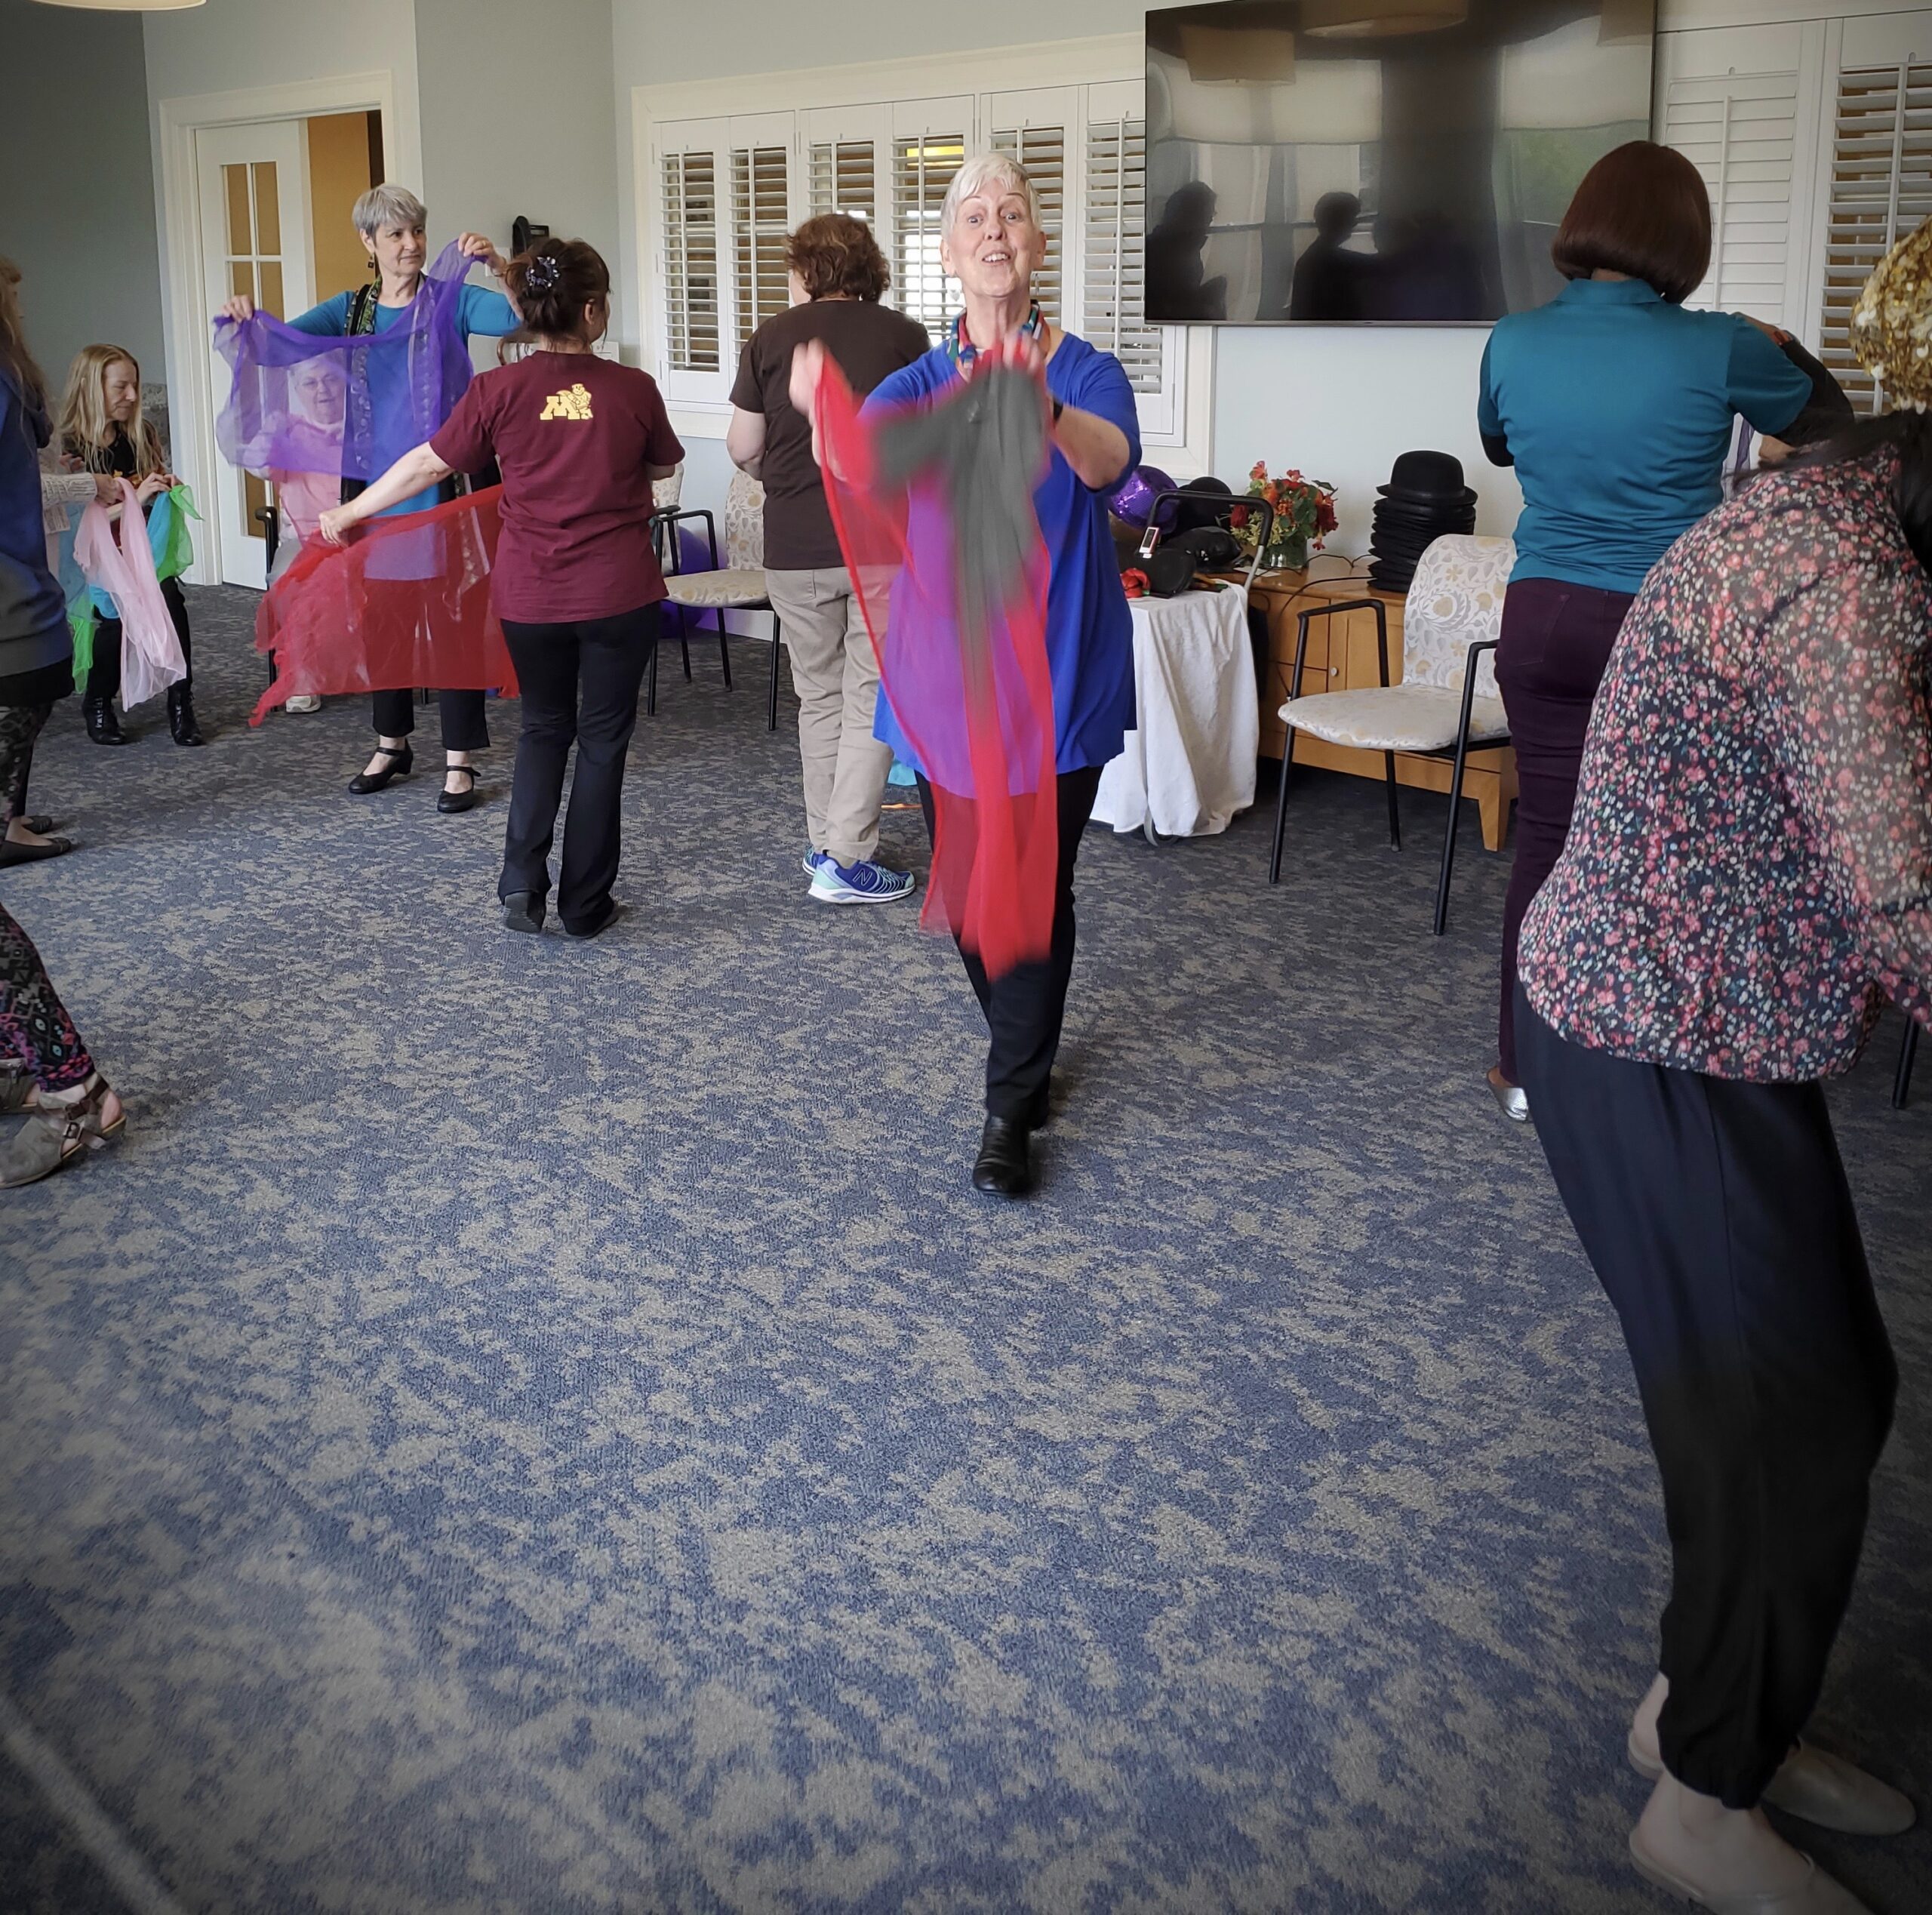 Trainees dance with people with dementia, sitting and standing.